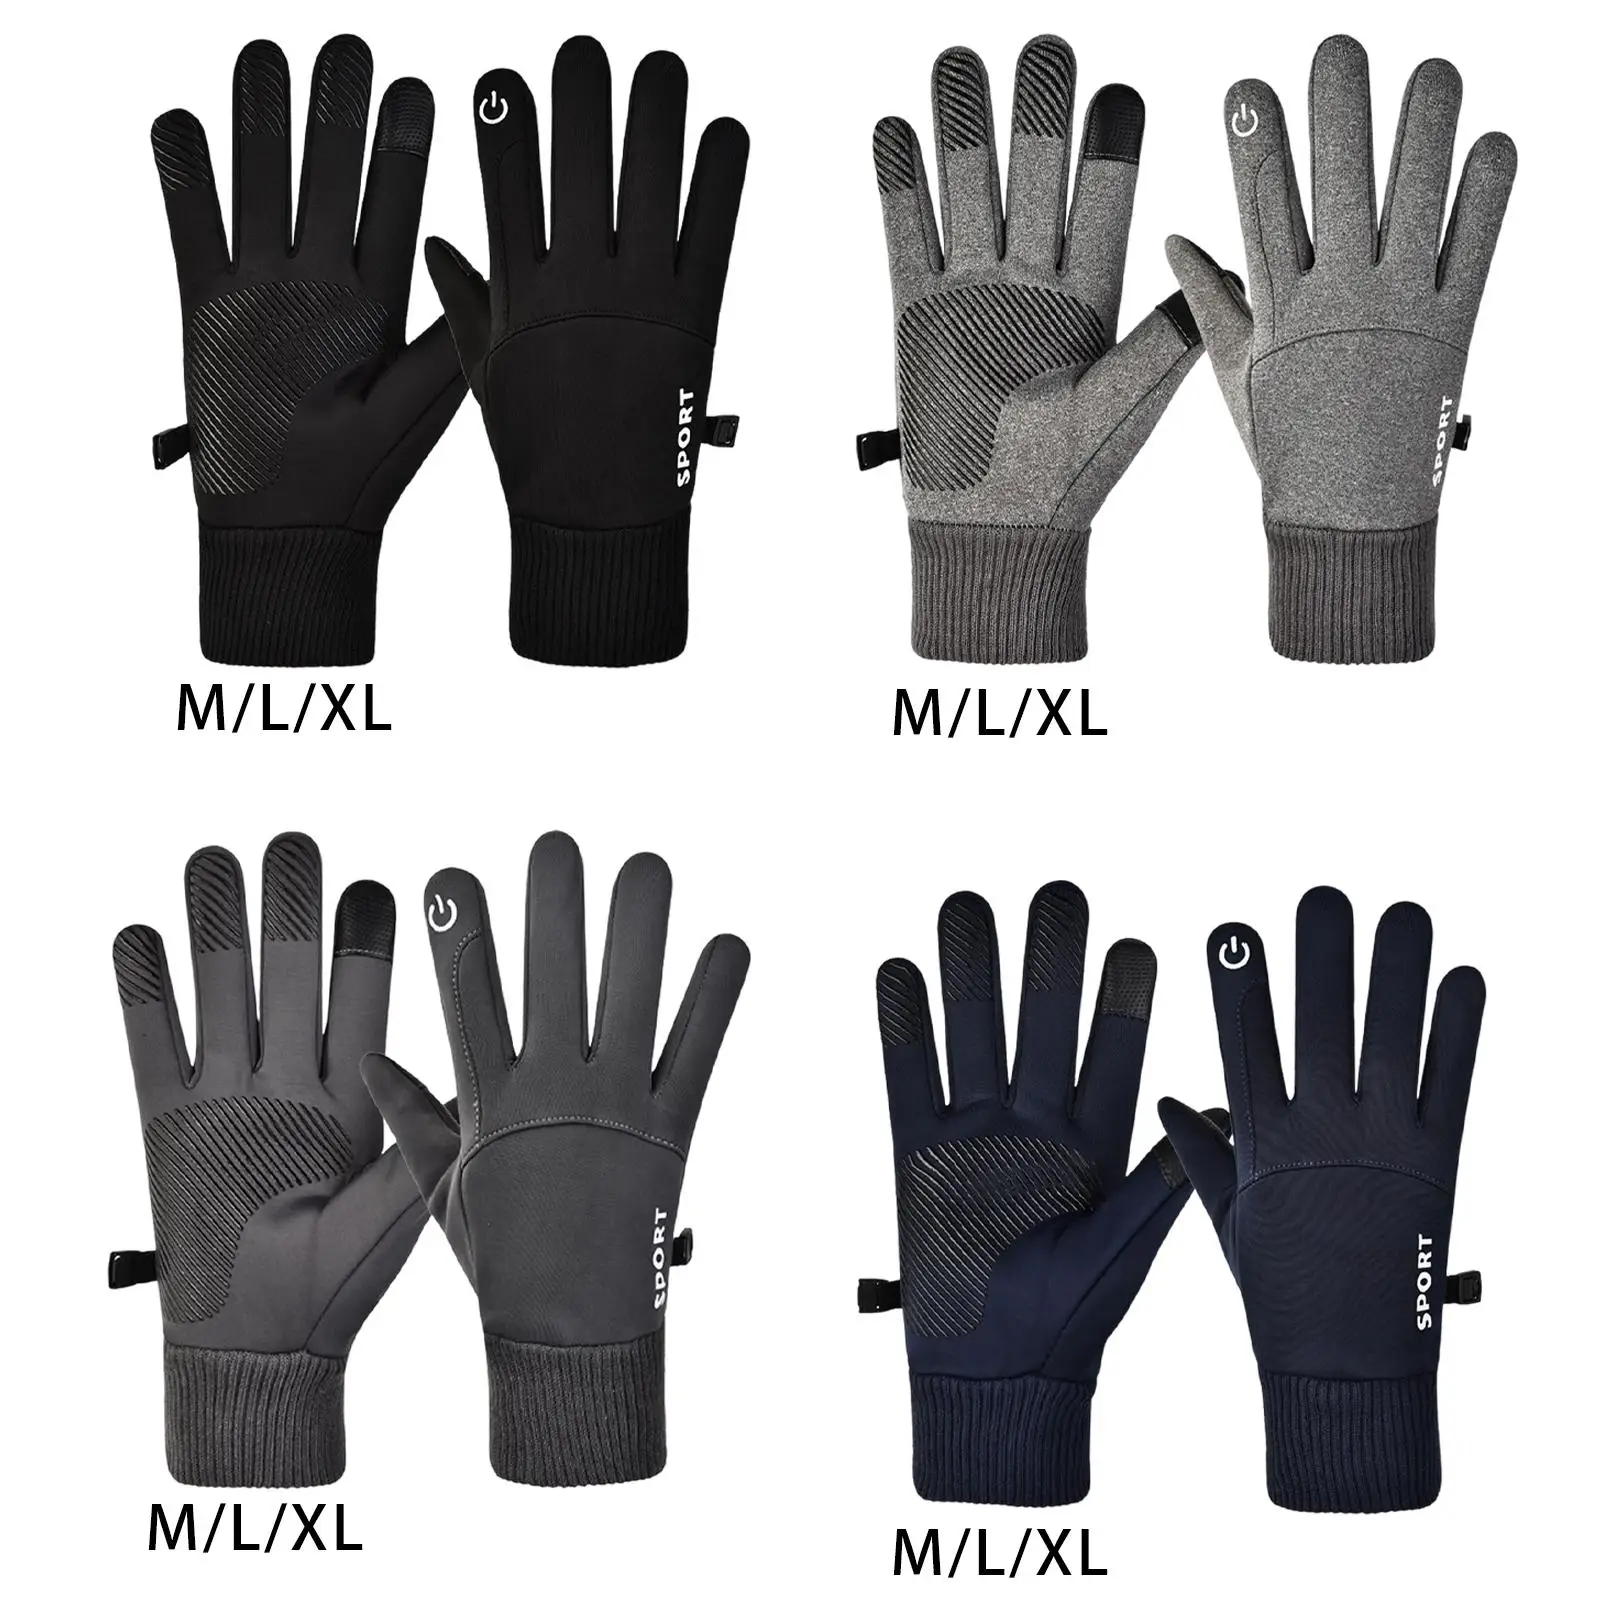 Cycling Gloves, Waterproof Durable Non Slip and Touch Screen Fashion Thermal